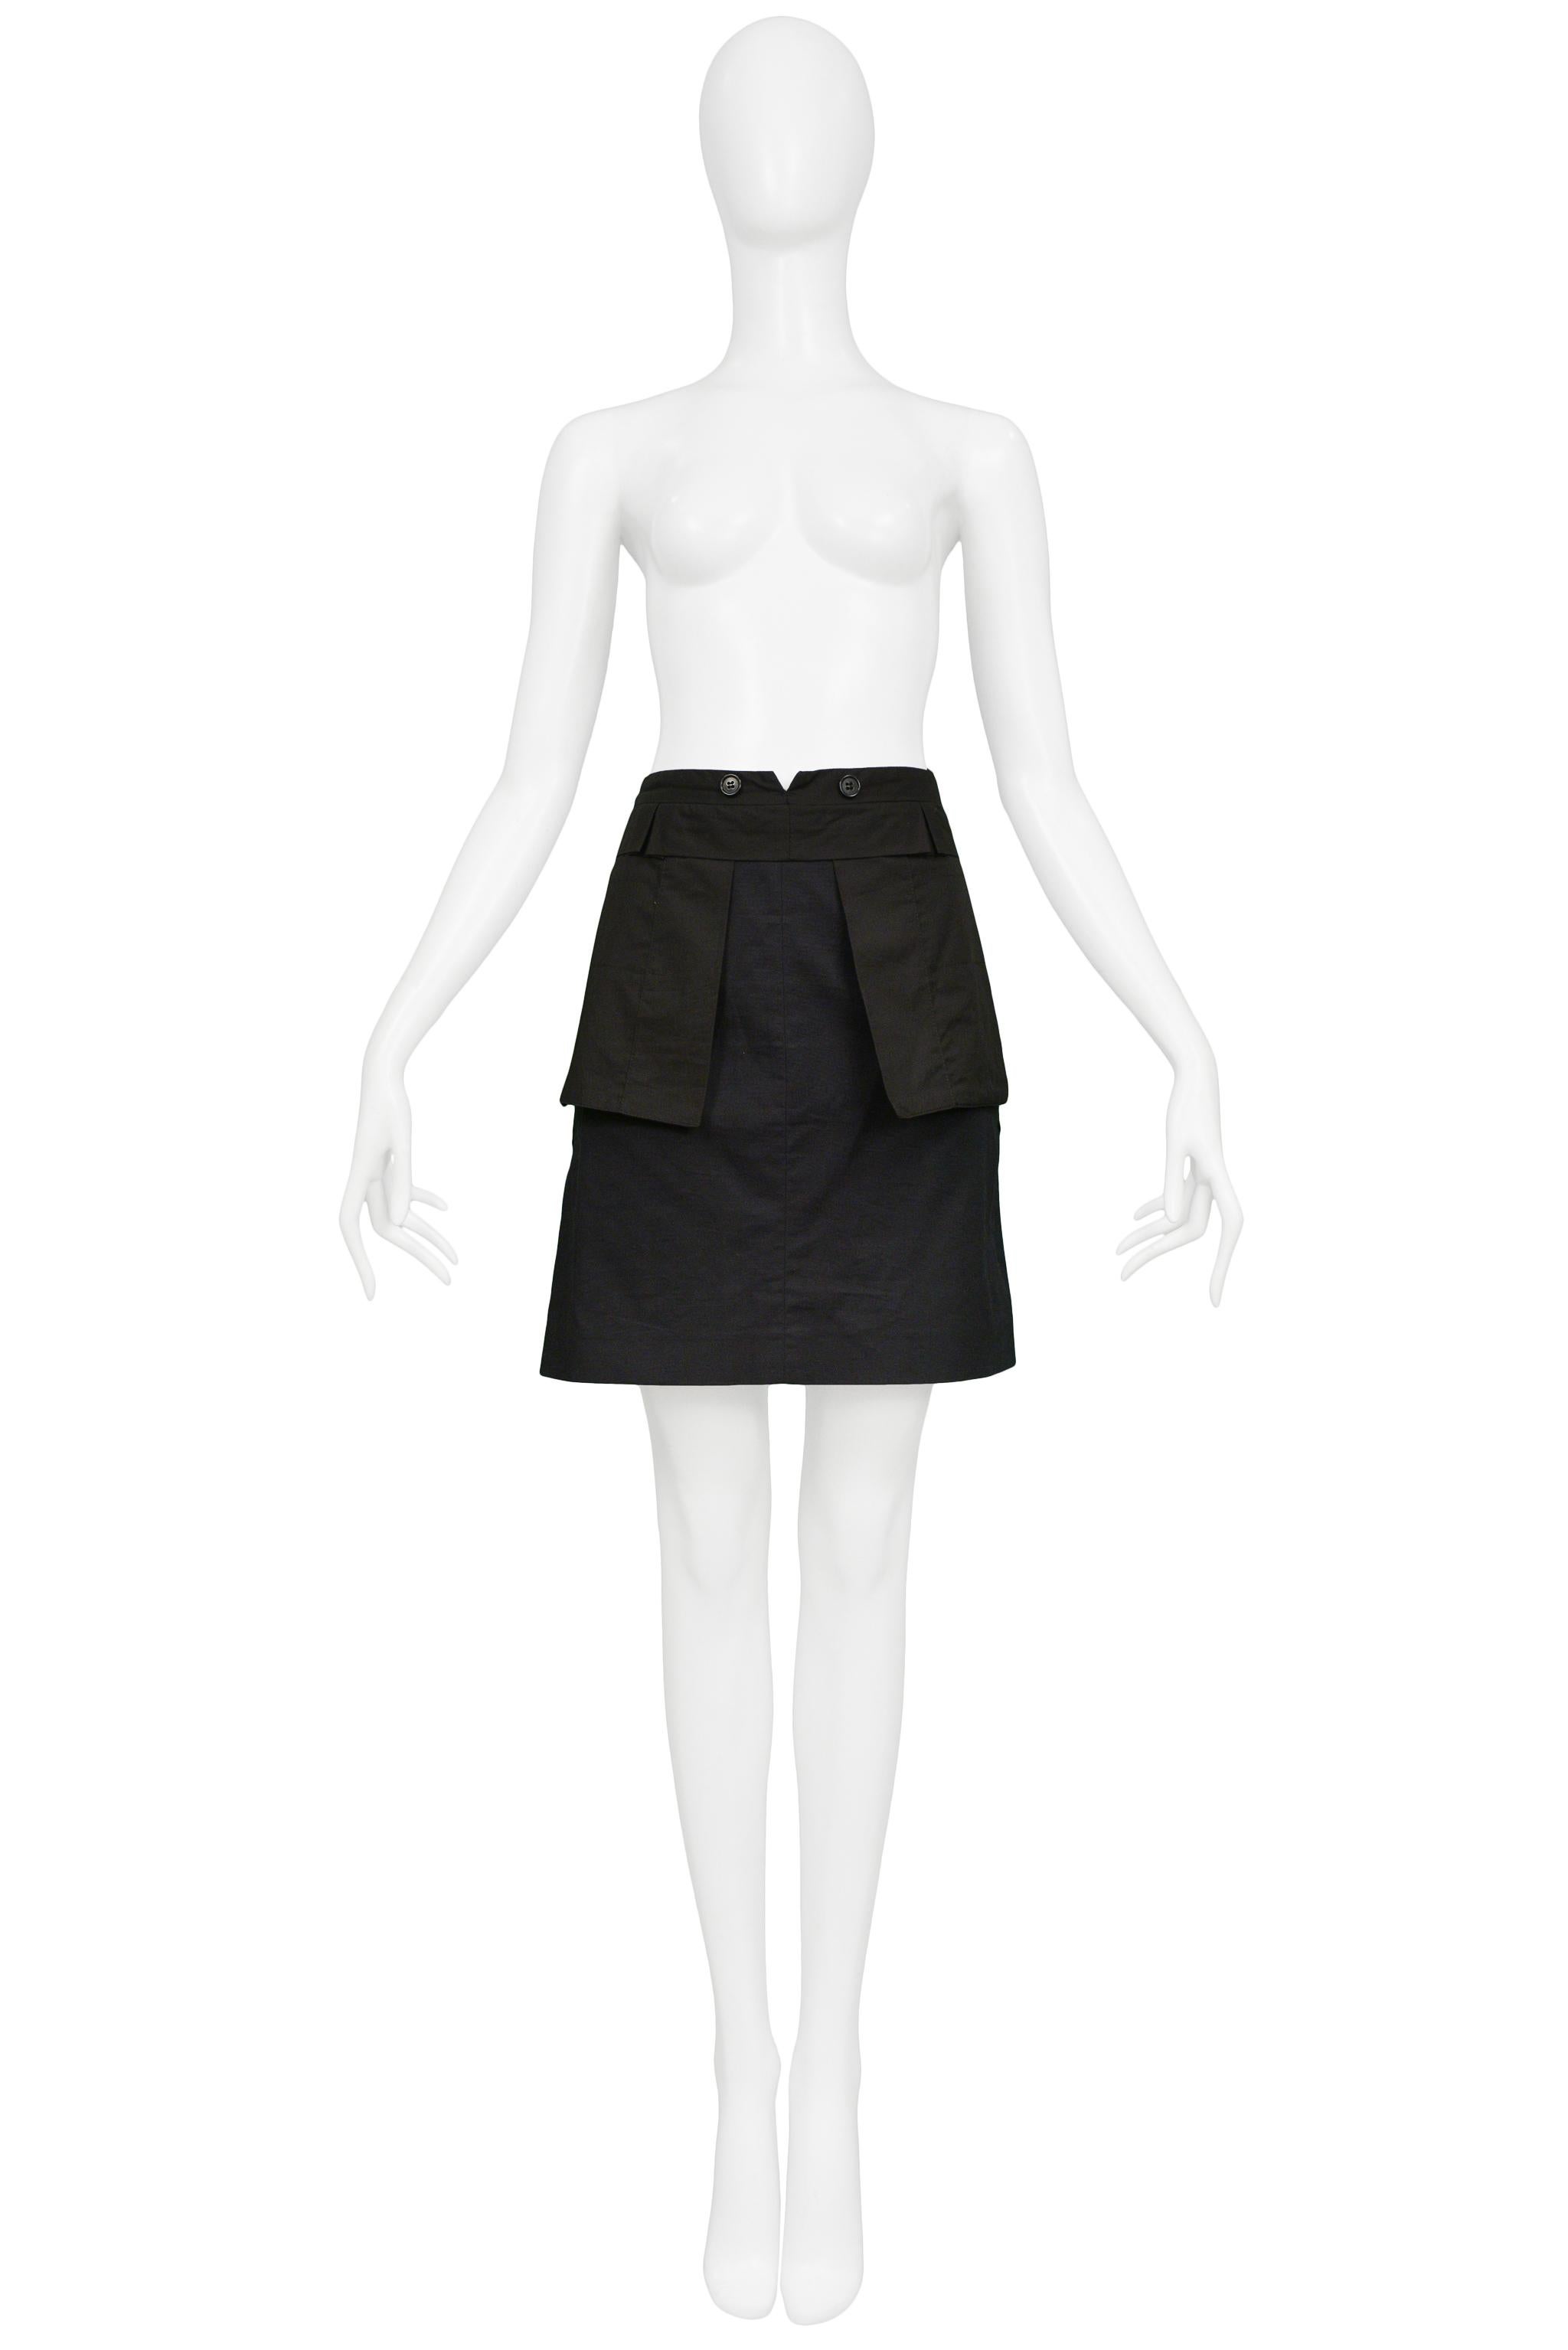 Resurrection Vintage is excited to offer a vintage Helmut Lang black cotton inside-out skirt featuring exposed front pocket flaps, a flap waistband with buttons, cargo pockets, and an asymmetrical hem. 

Helmut Lang 
Size 42
Measurements: Waist 32